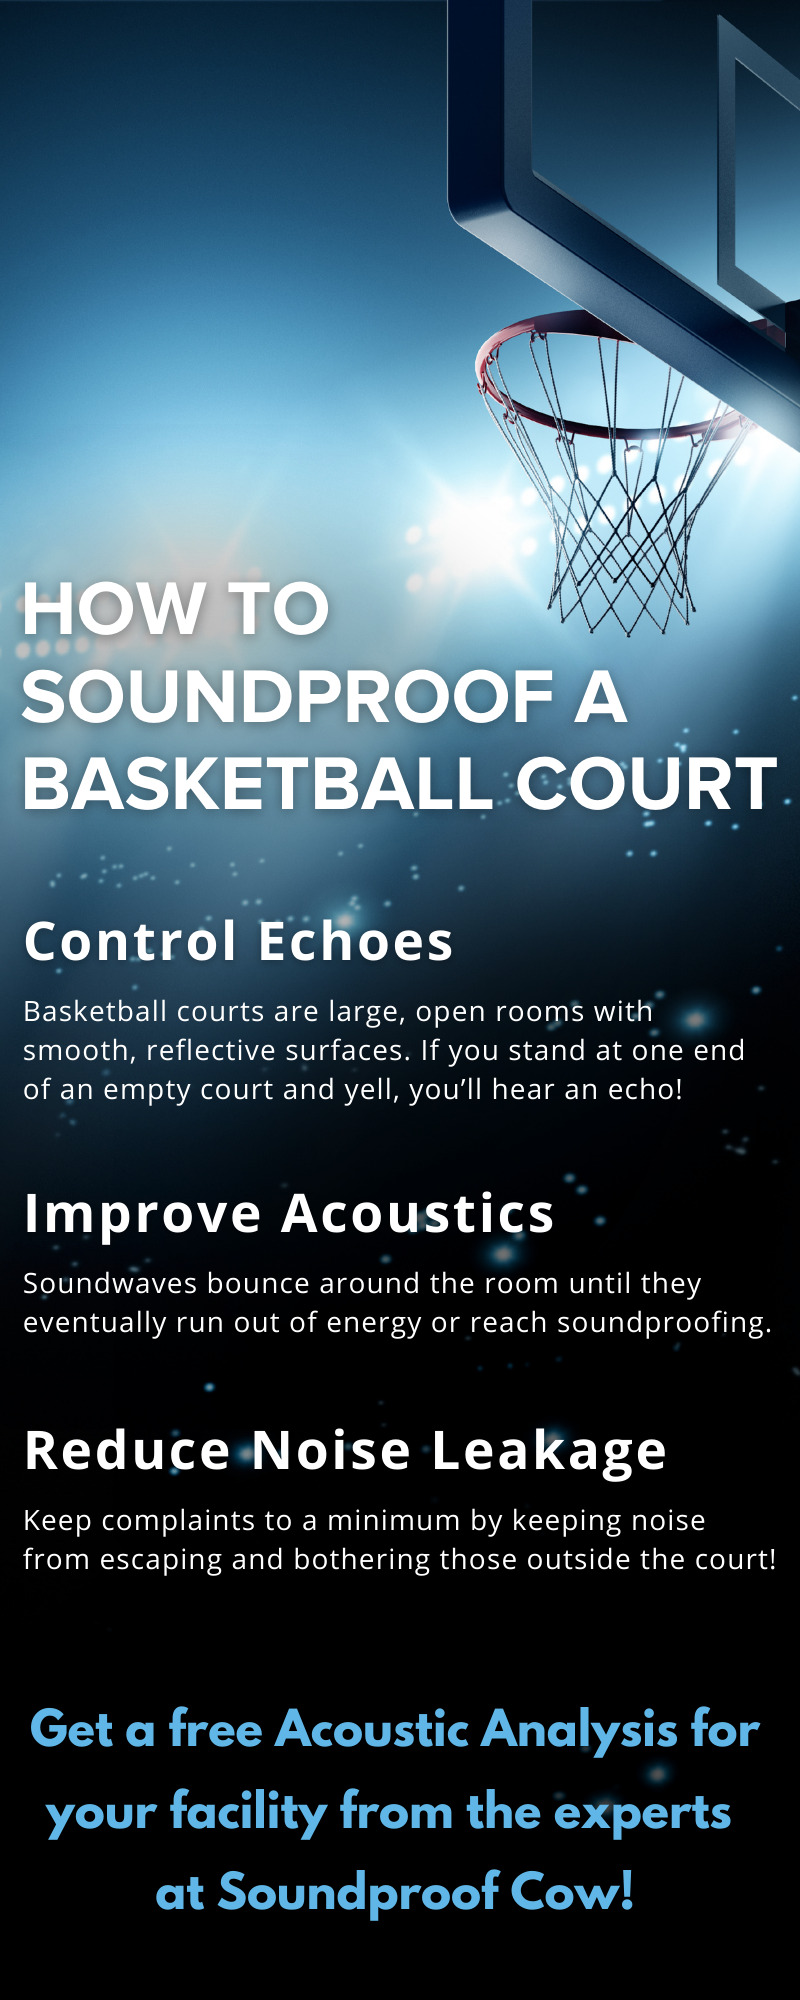 How to Soundproof a Basketball Court